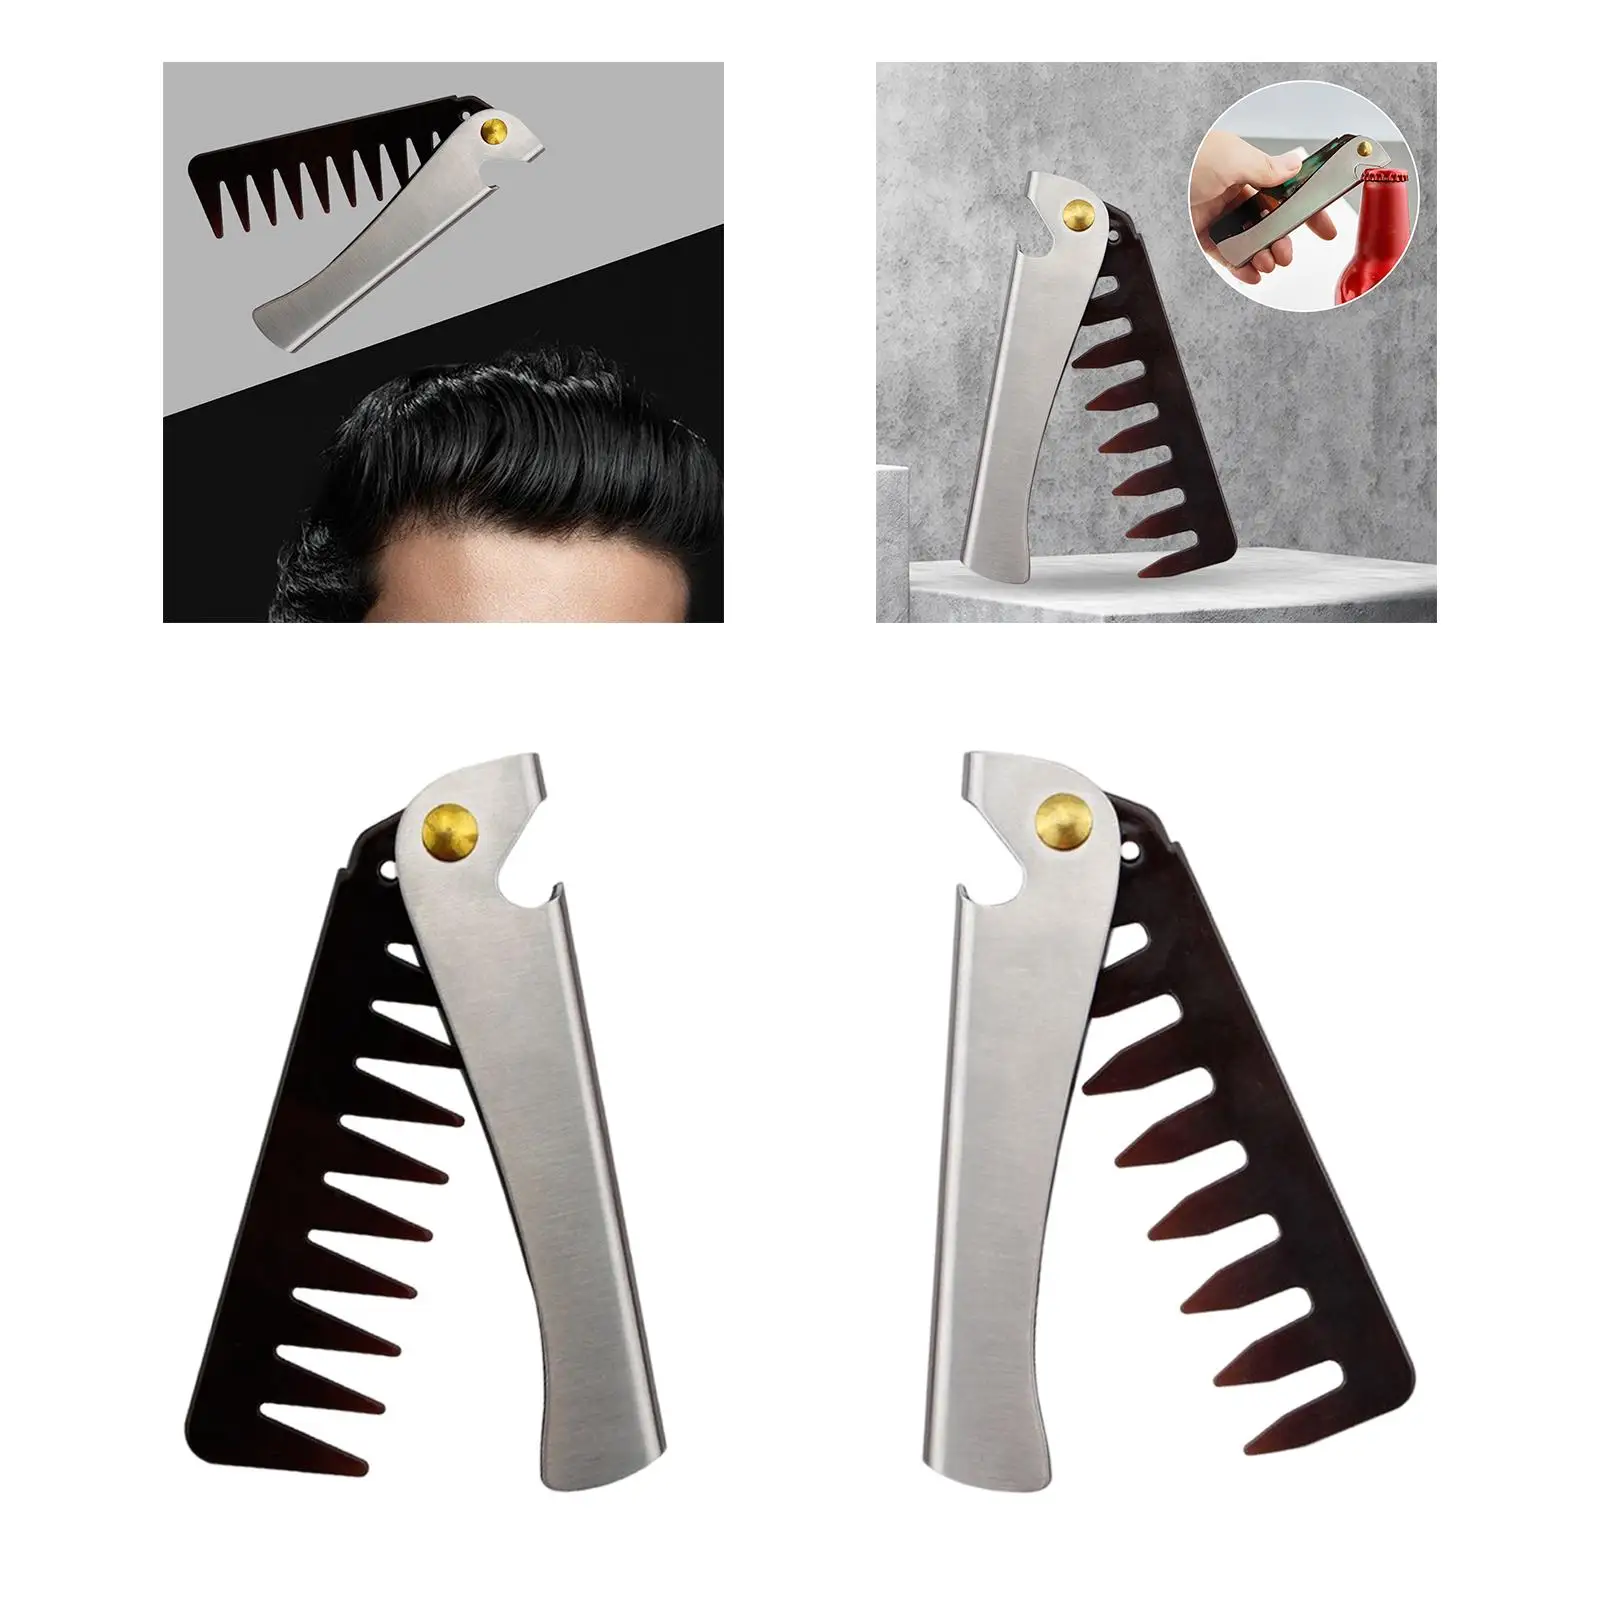 Portable Folding Beard Comb for Men Stainless Steel Grooming Combing Hair Gift Retro Oil Head Comb for Stylists Home Use Travel